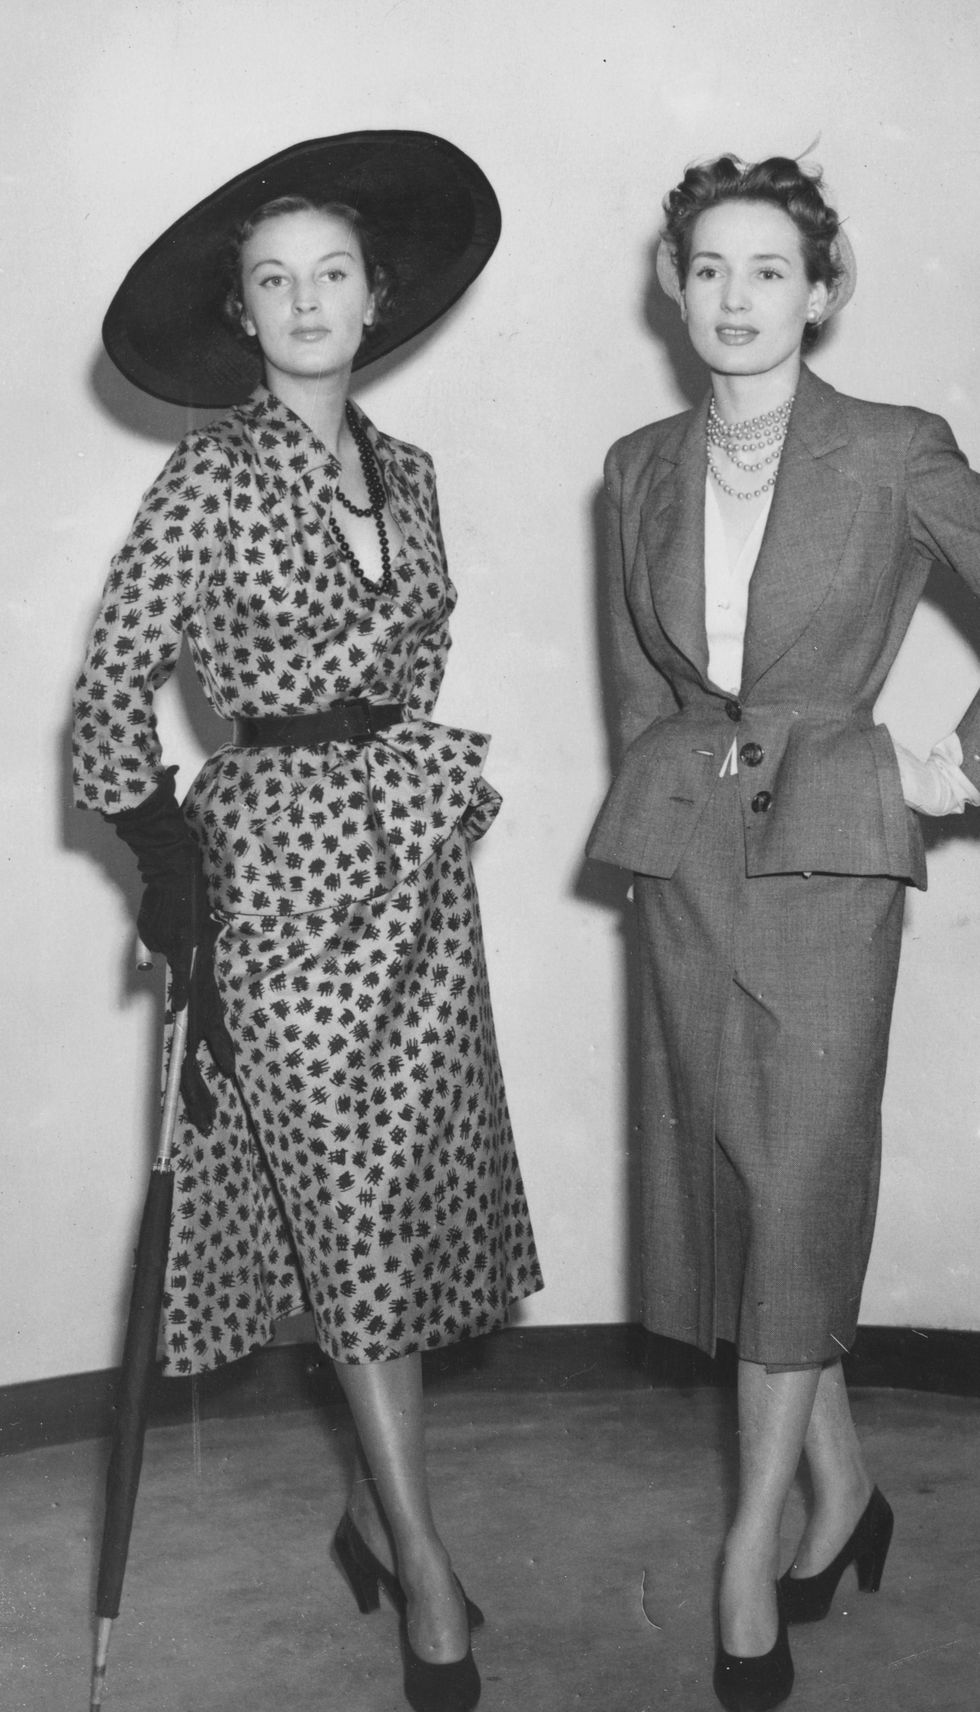 1950s Fashion Photos and Trends - Fashion Trends from the '50s